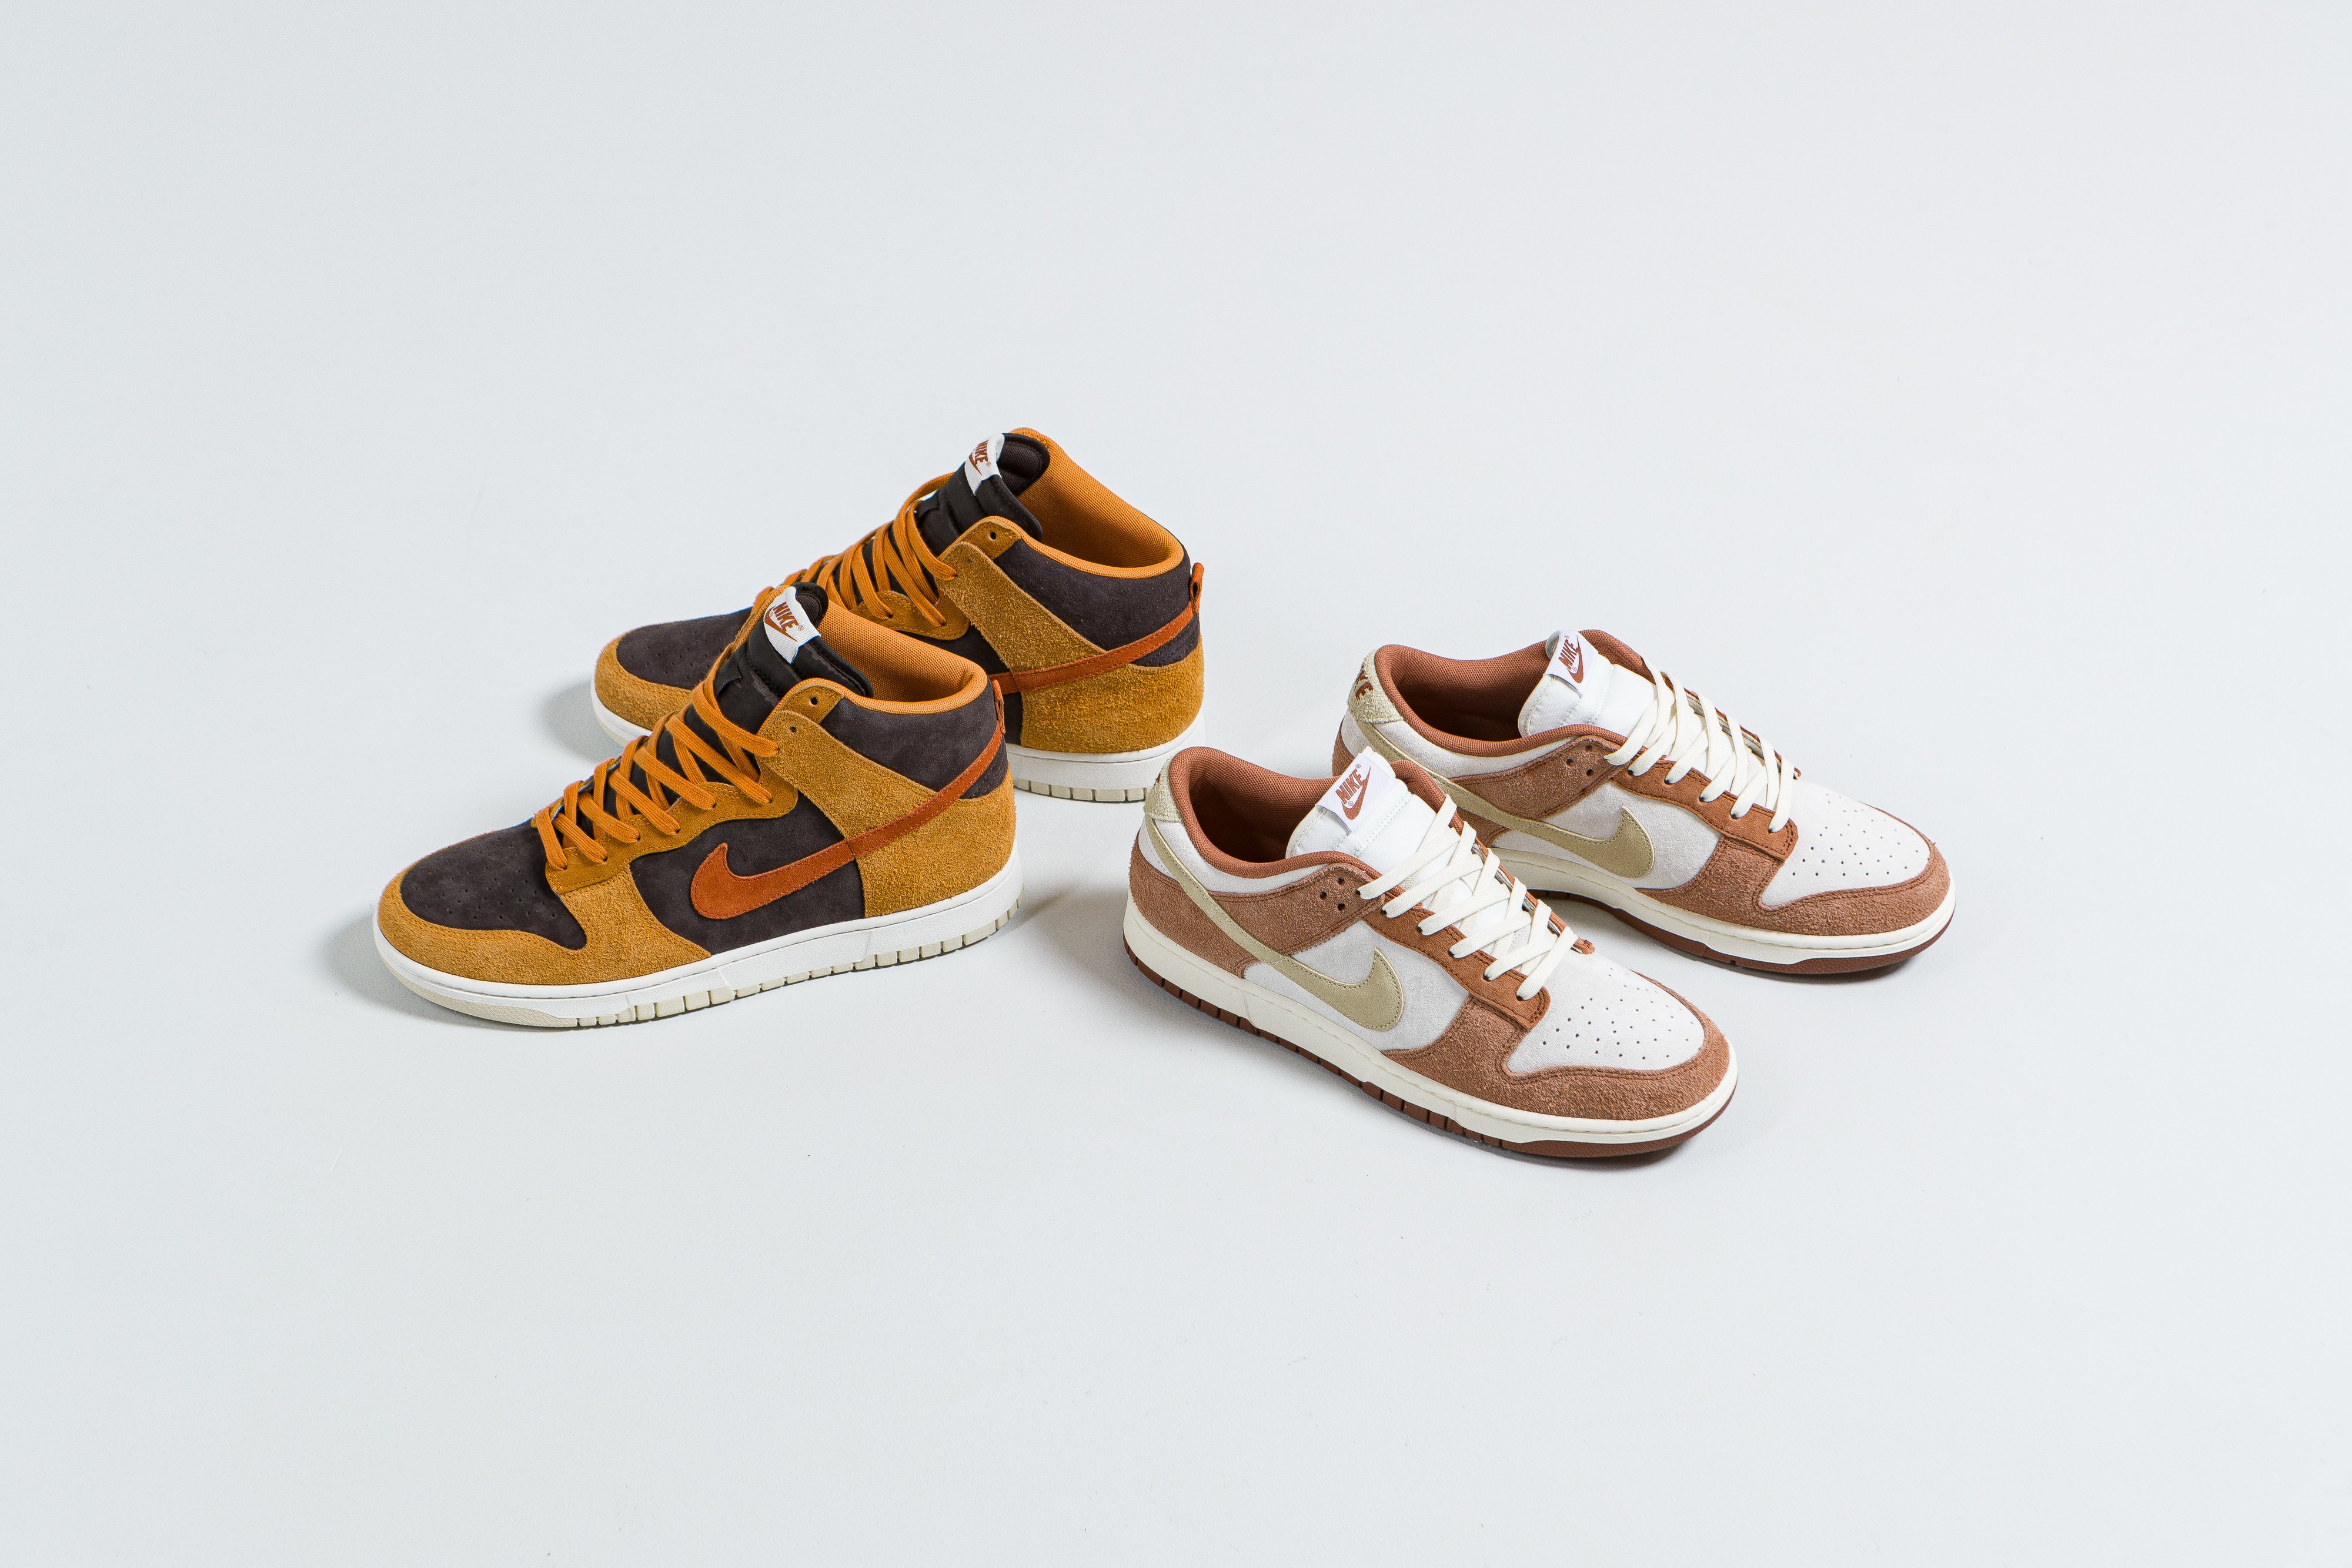 Up There Launches - Nike Dunk Low 'Medium Curry' & Dunk Hi 'Dark Curry'